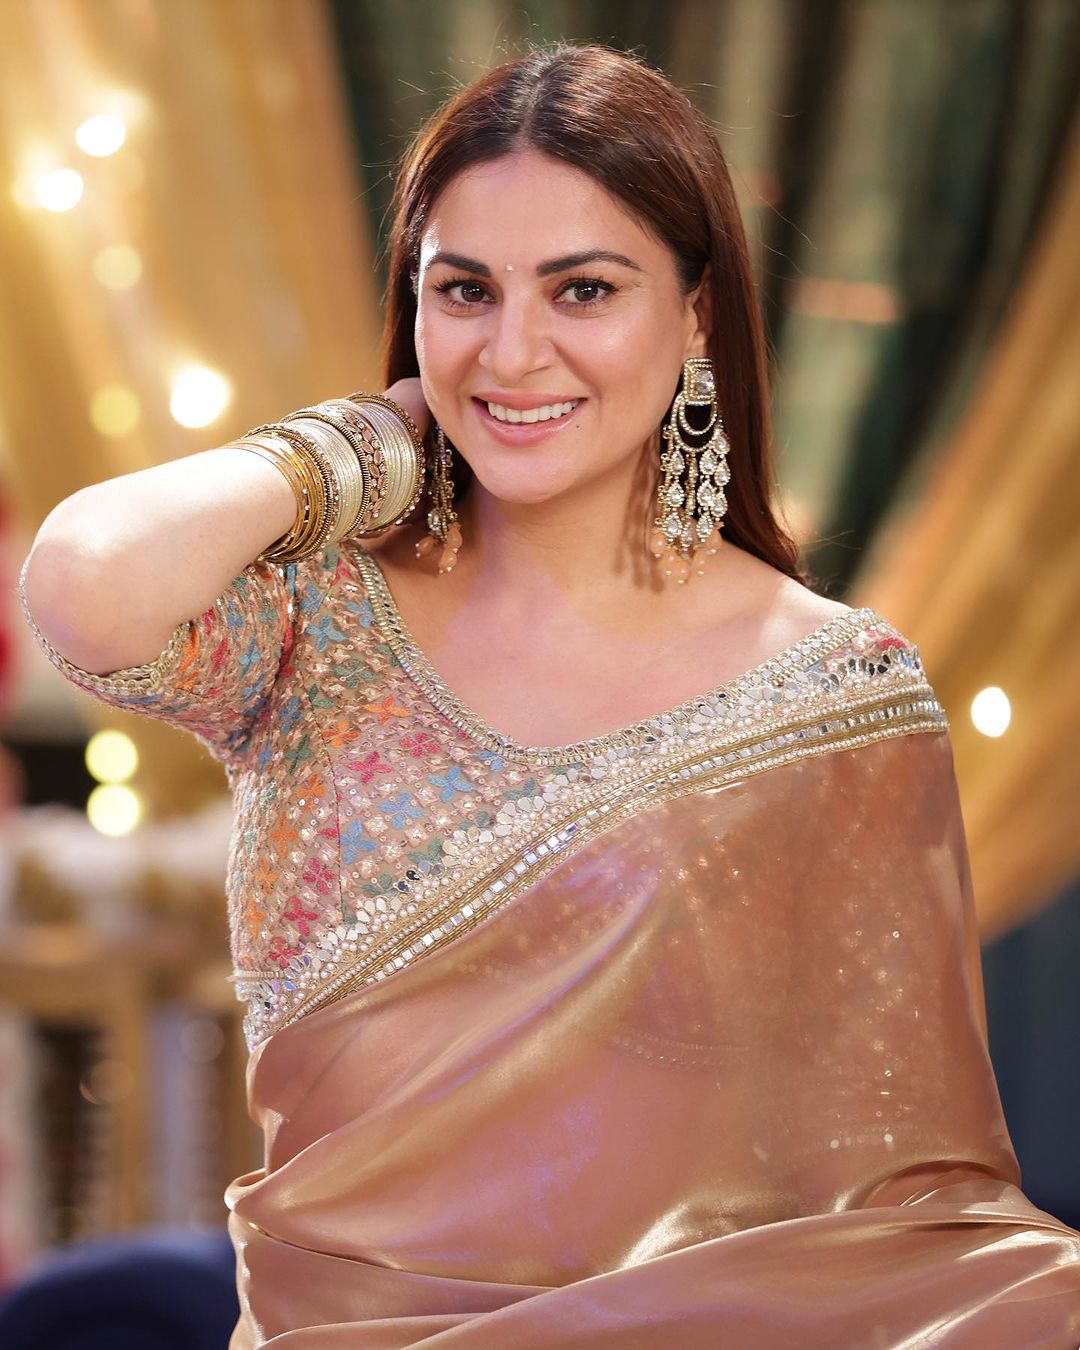 Telly world’s Darling Shraddha Arya Updated About Her Health? How Fans Reacted For It? Look Over Here!